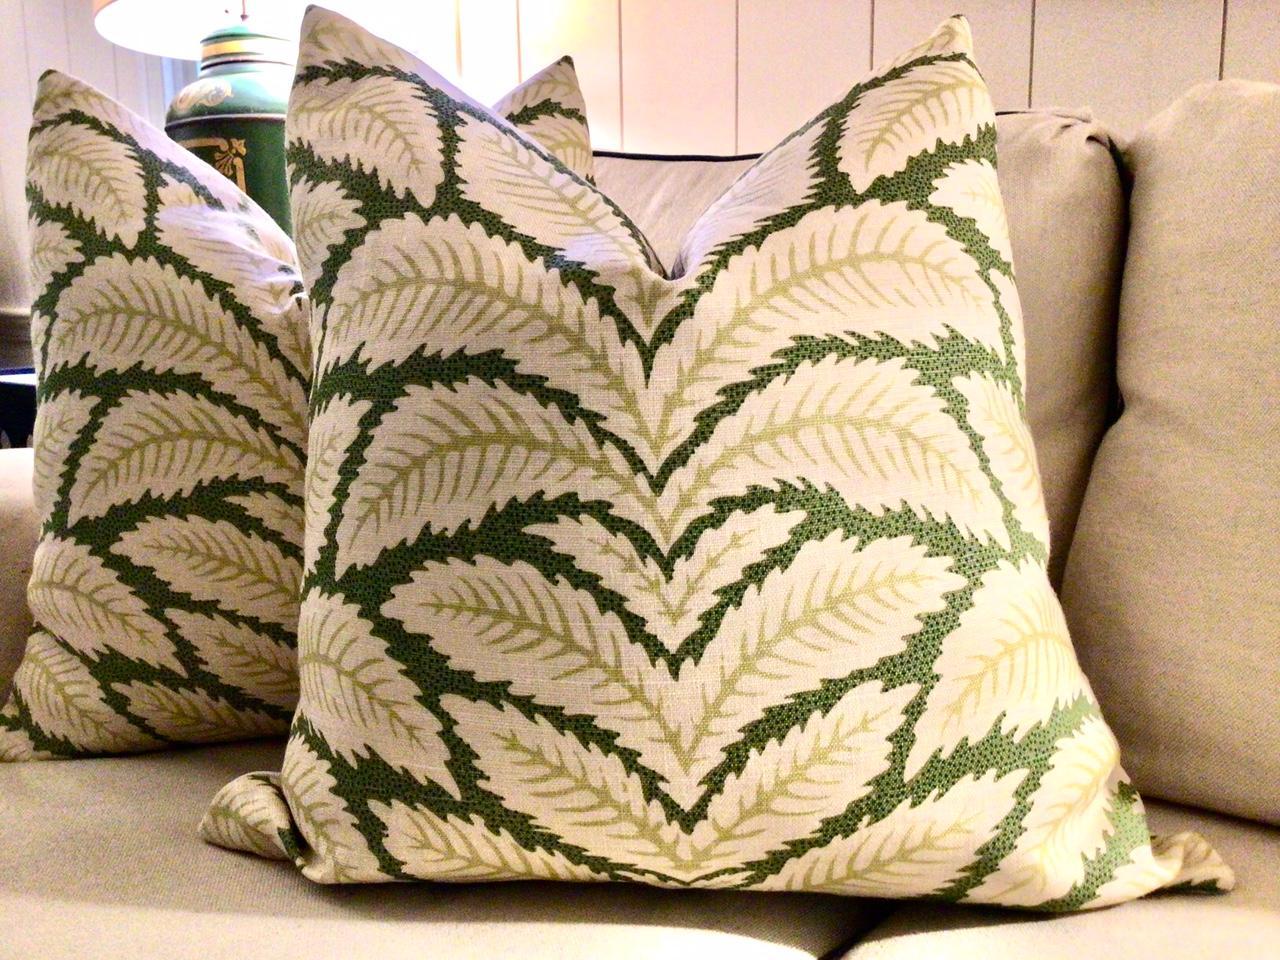 A fresh take on a wonderful fern pattern. TALAVERA in leaf features a dense print of overlapping fern leaves in a soft olive/ chartreuse on off-white. These pillows would be a wonderful mix in pattern for a grouping using large scale and solids